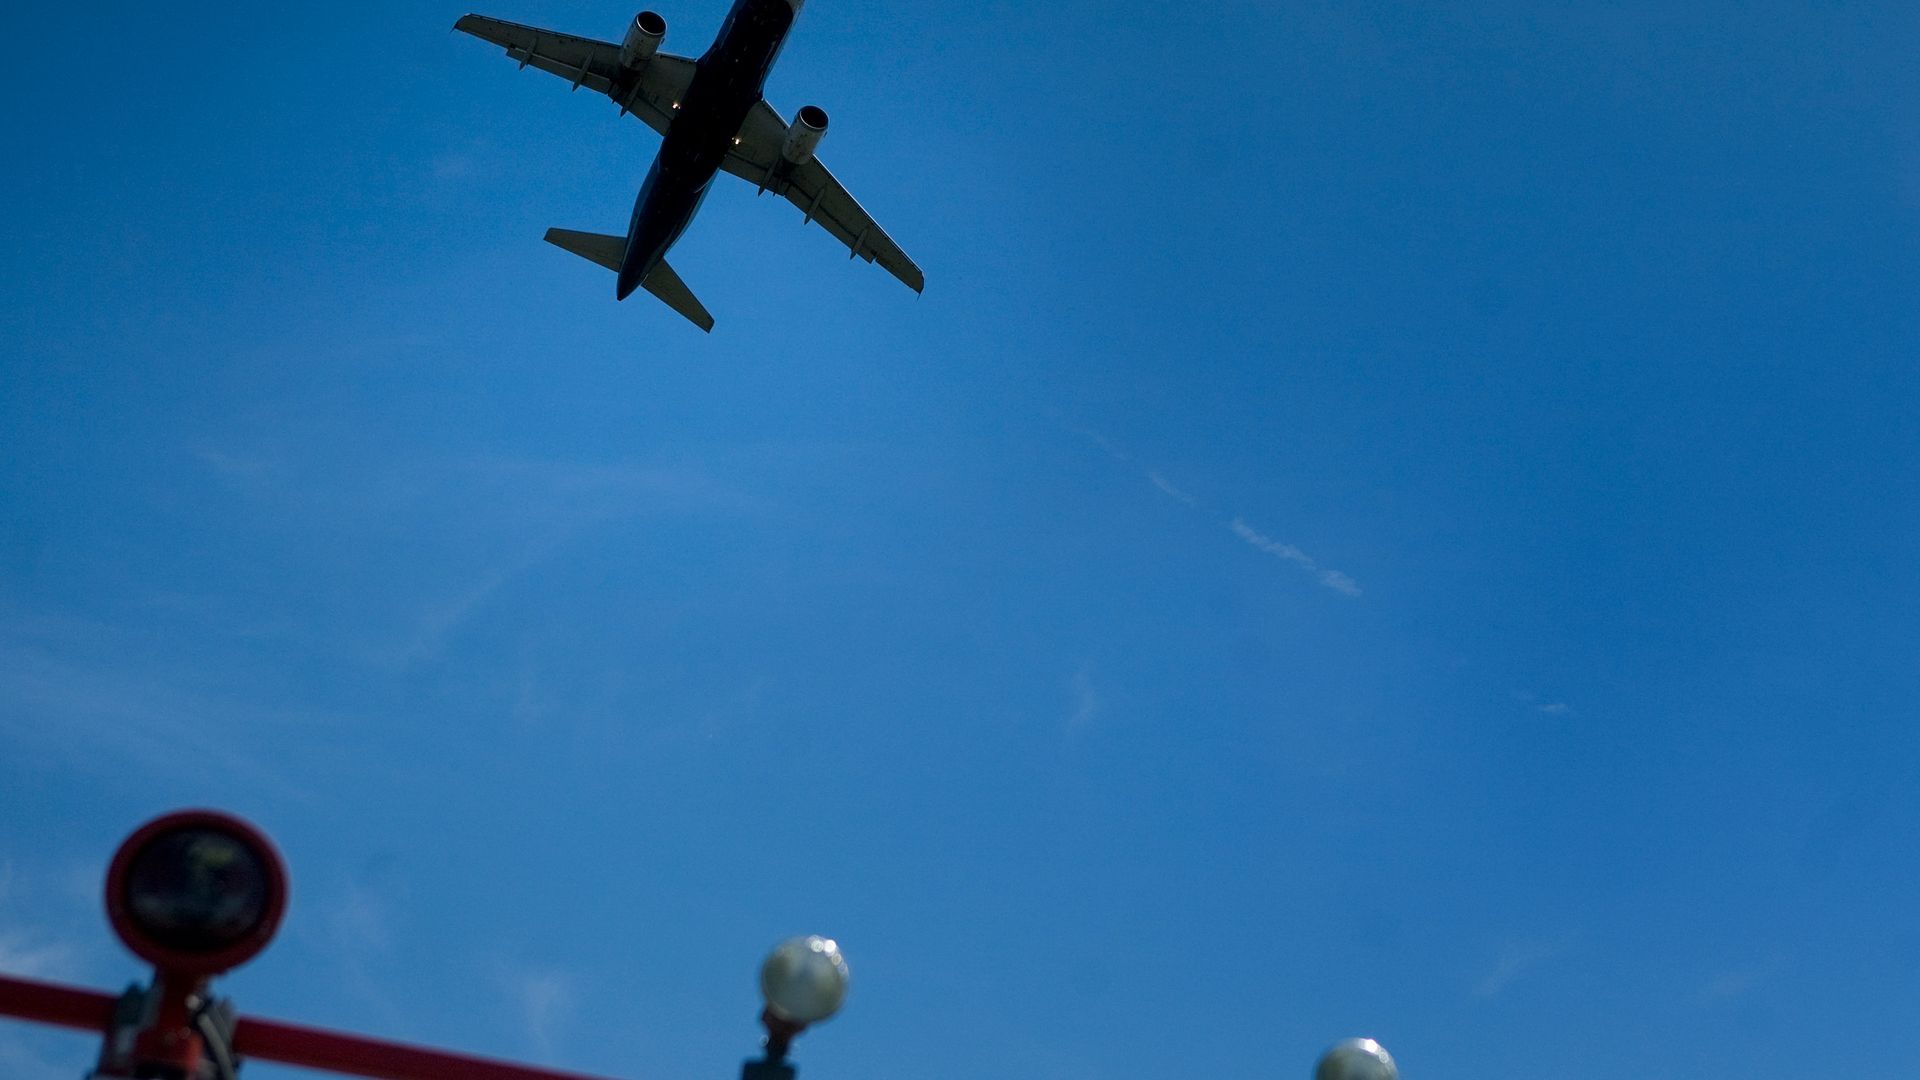 An airplane takes off from Reagan National Airport